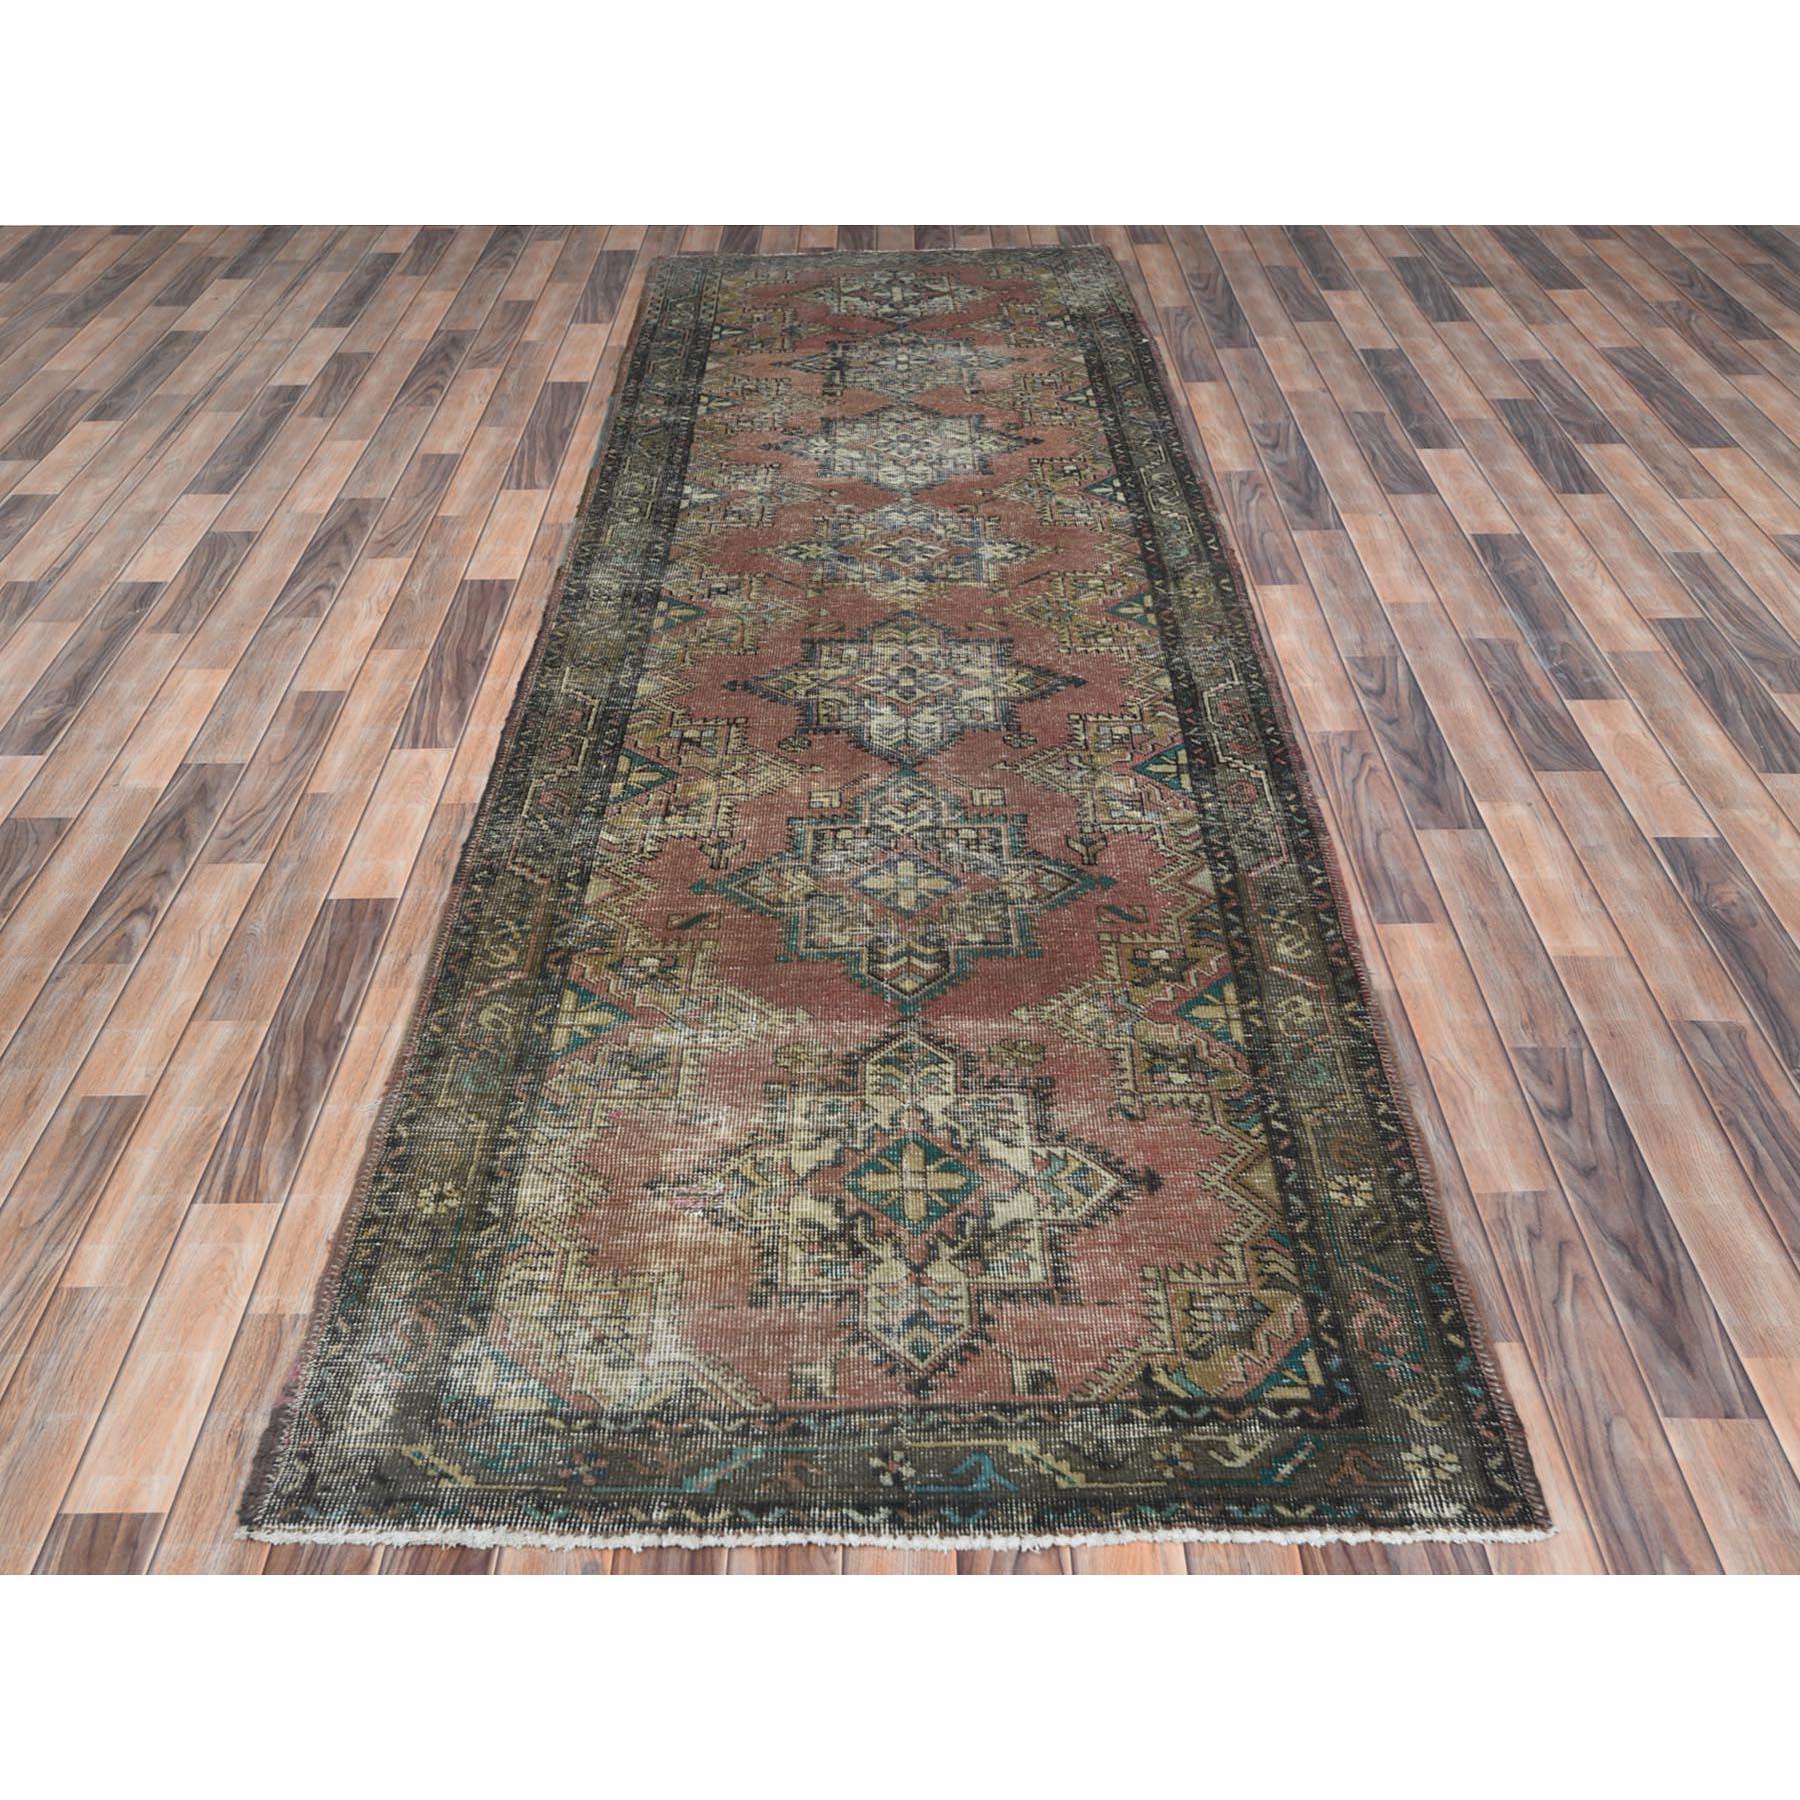 This fabulous Hand-Knotted carpet has been created and designed for extra strength and durability. This rug has been handcrafted for weeks in the traditional method that is used to make
Exact rug size in feet and inches : 3'9